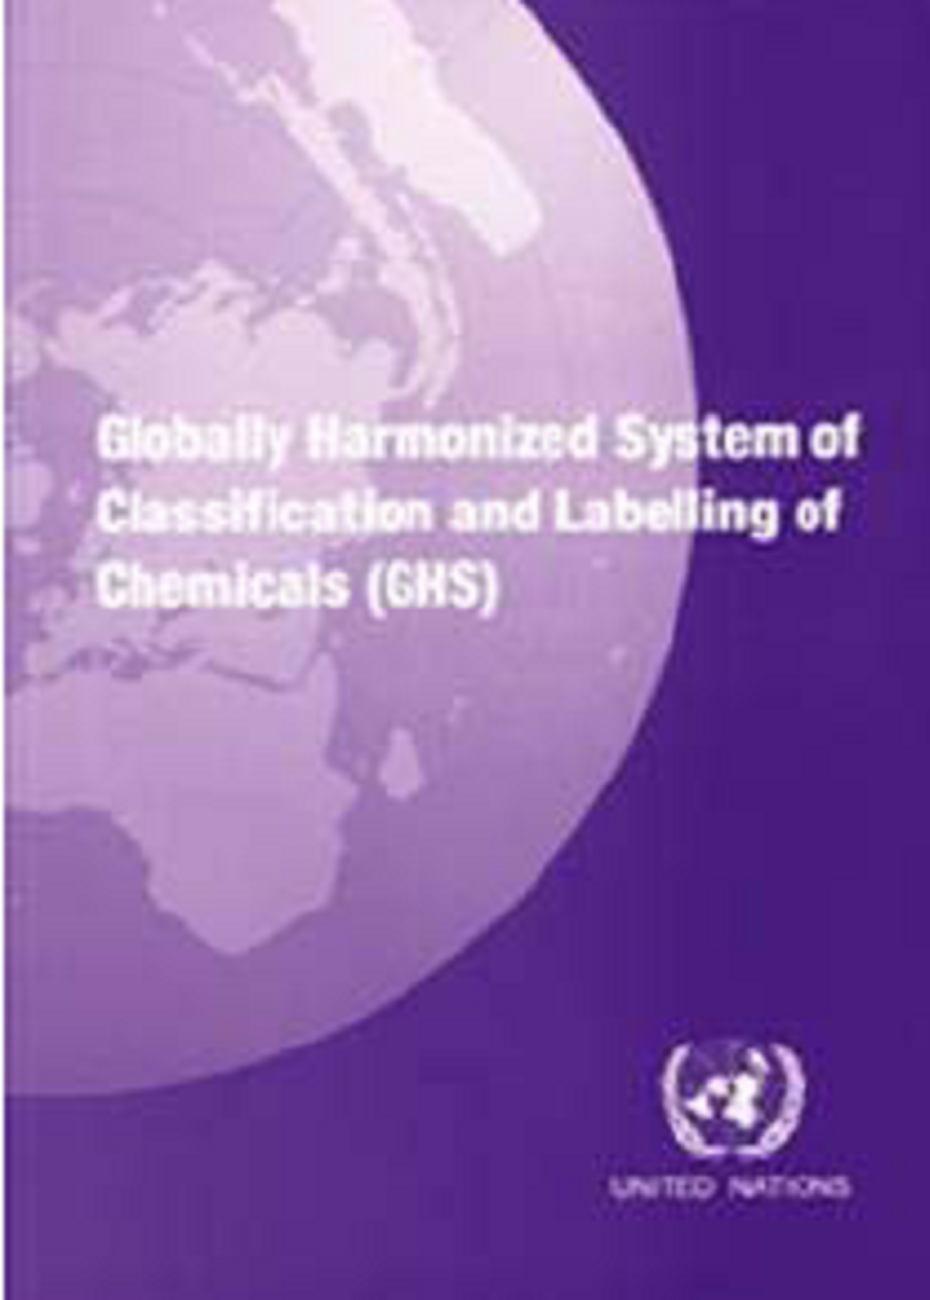 Introduction What is Globally Harmonized System or GHS?